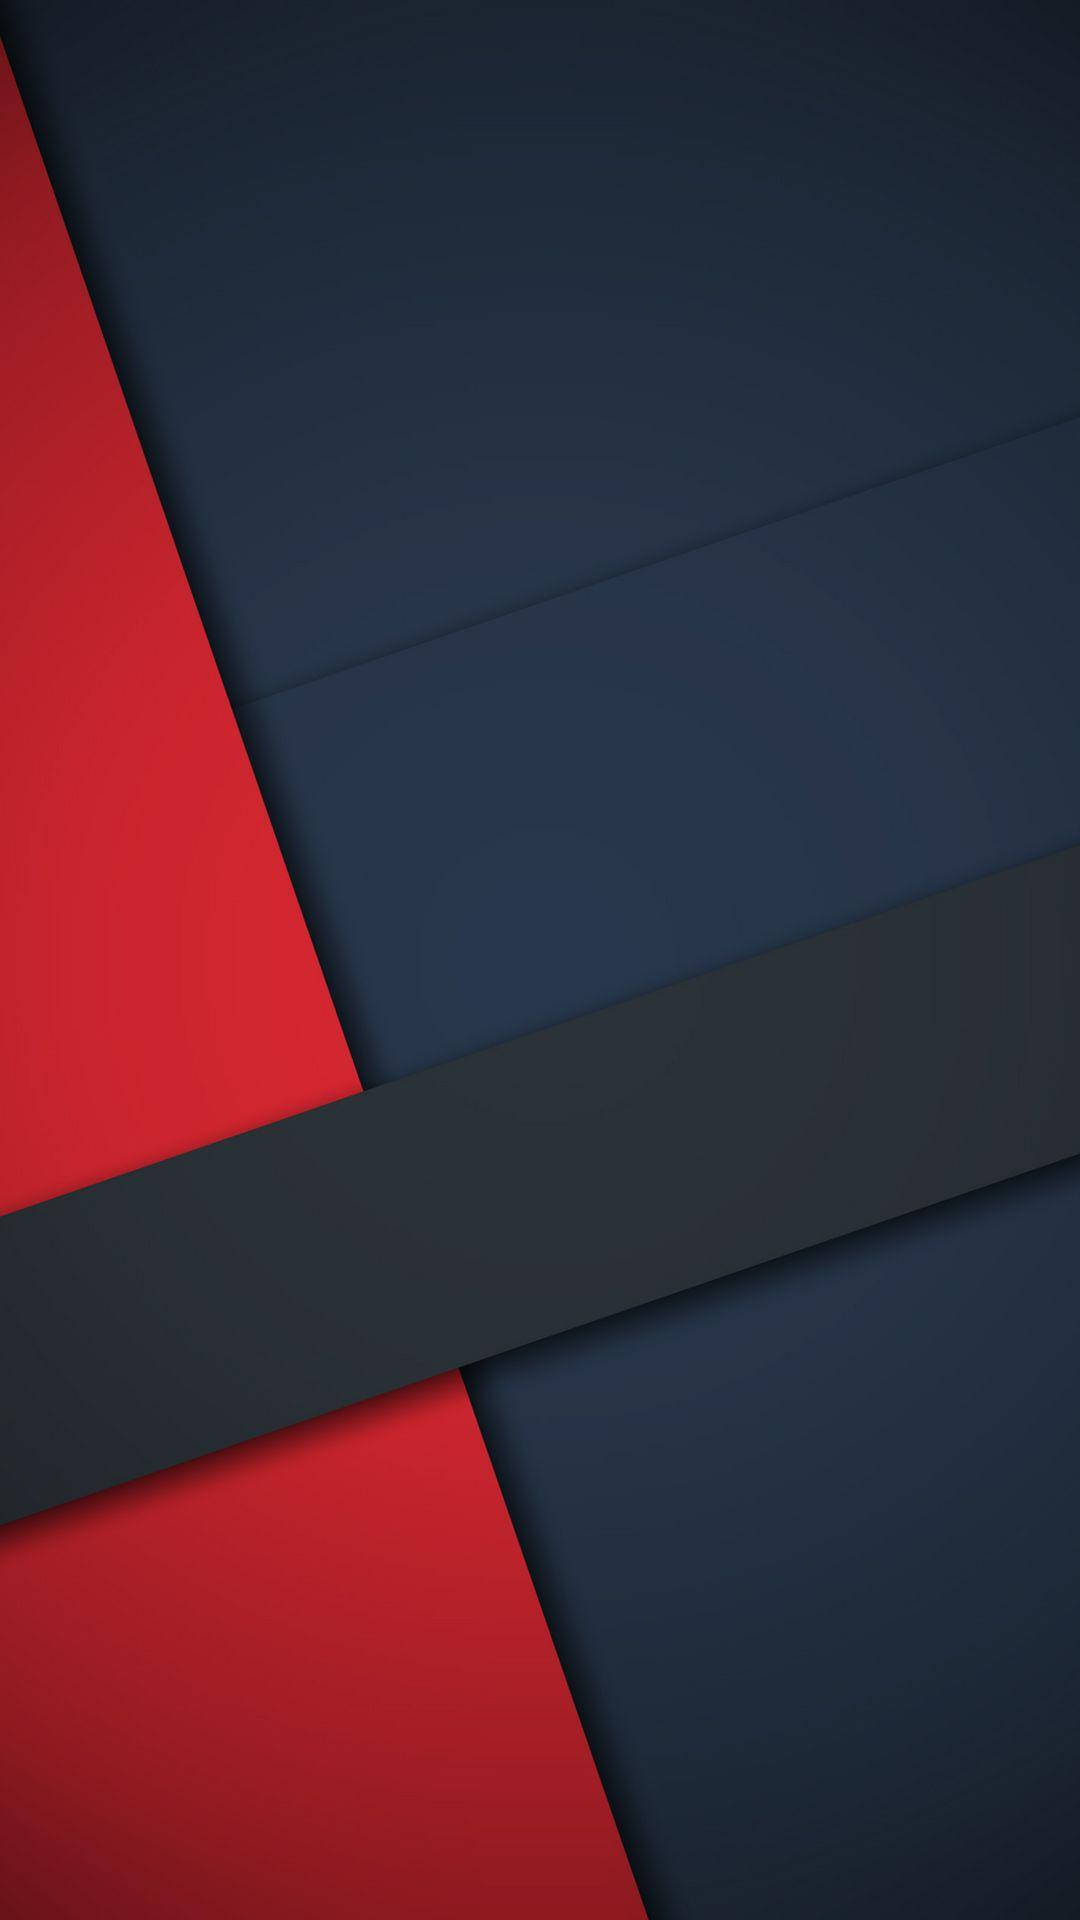 Abstract Red And Blue Material Wallpaper